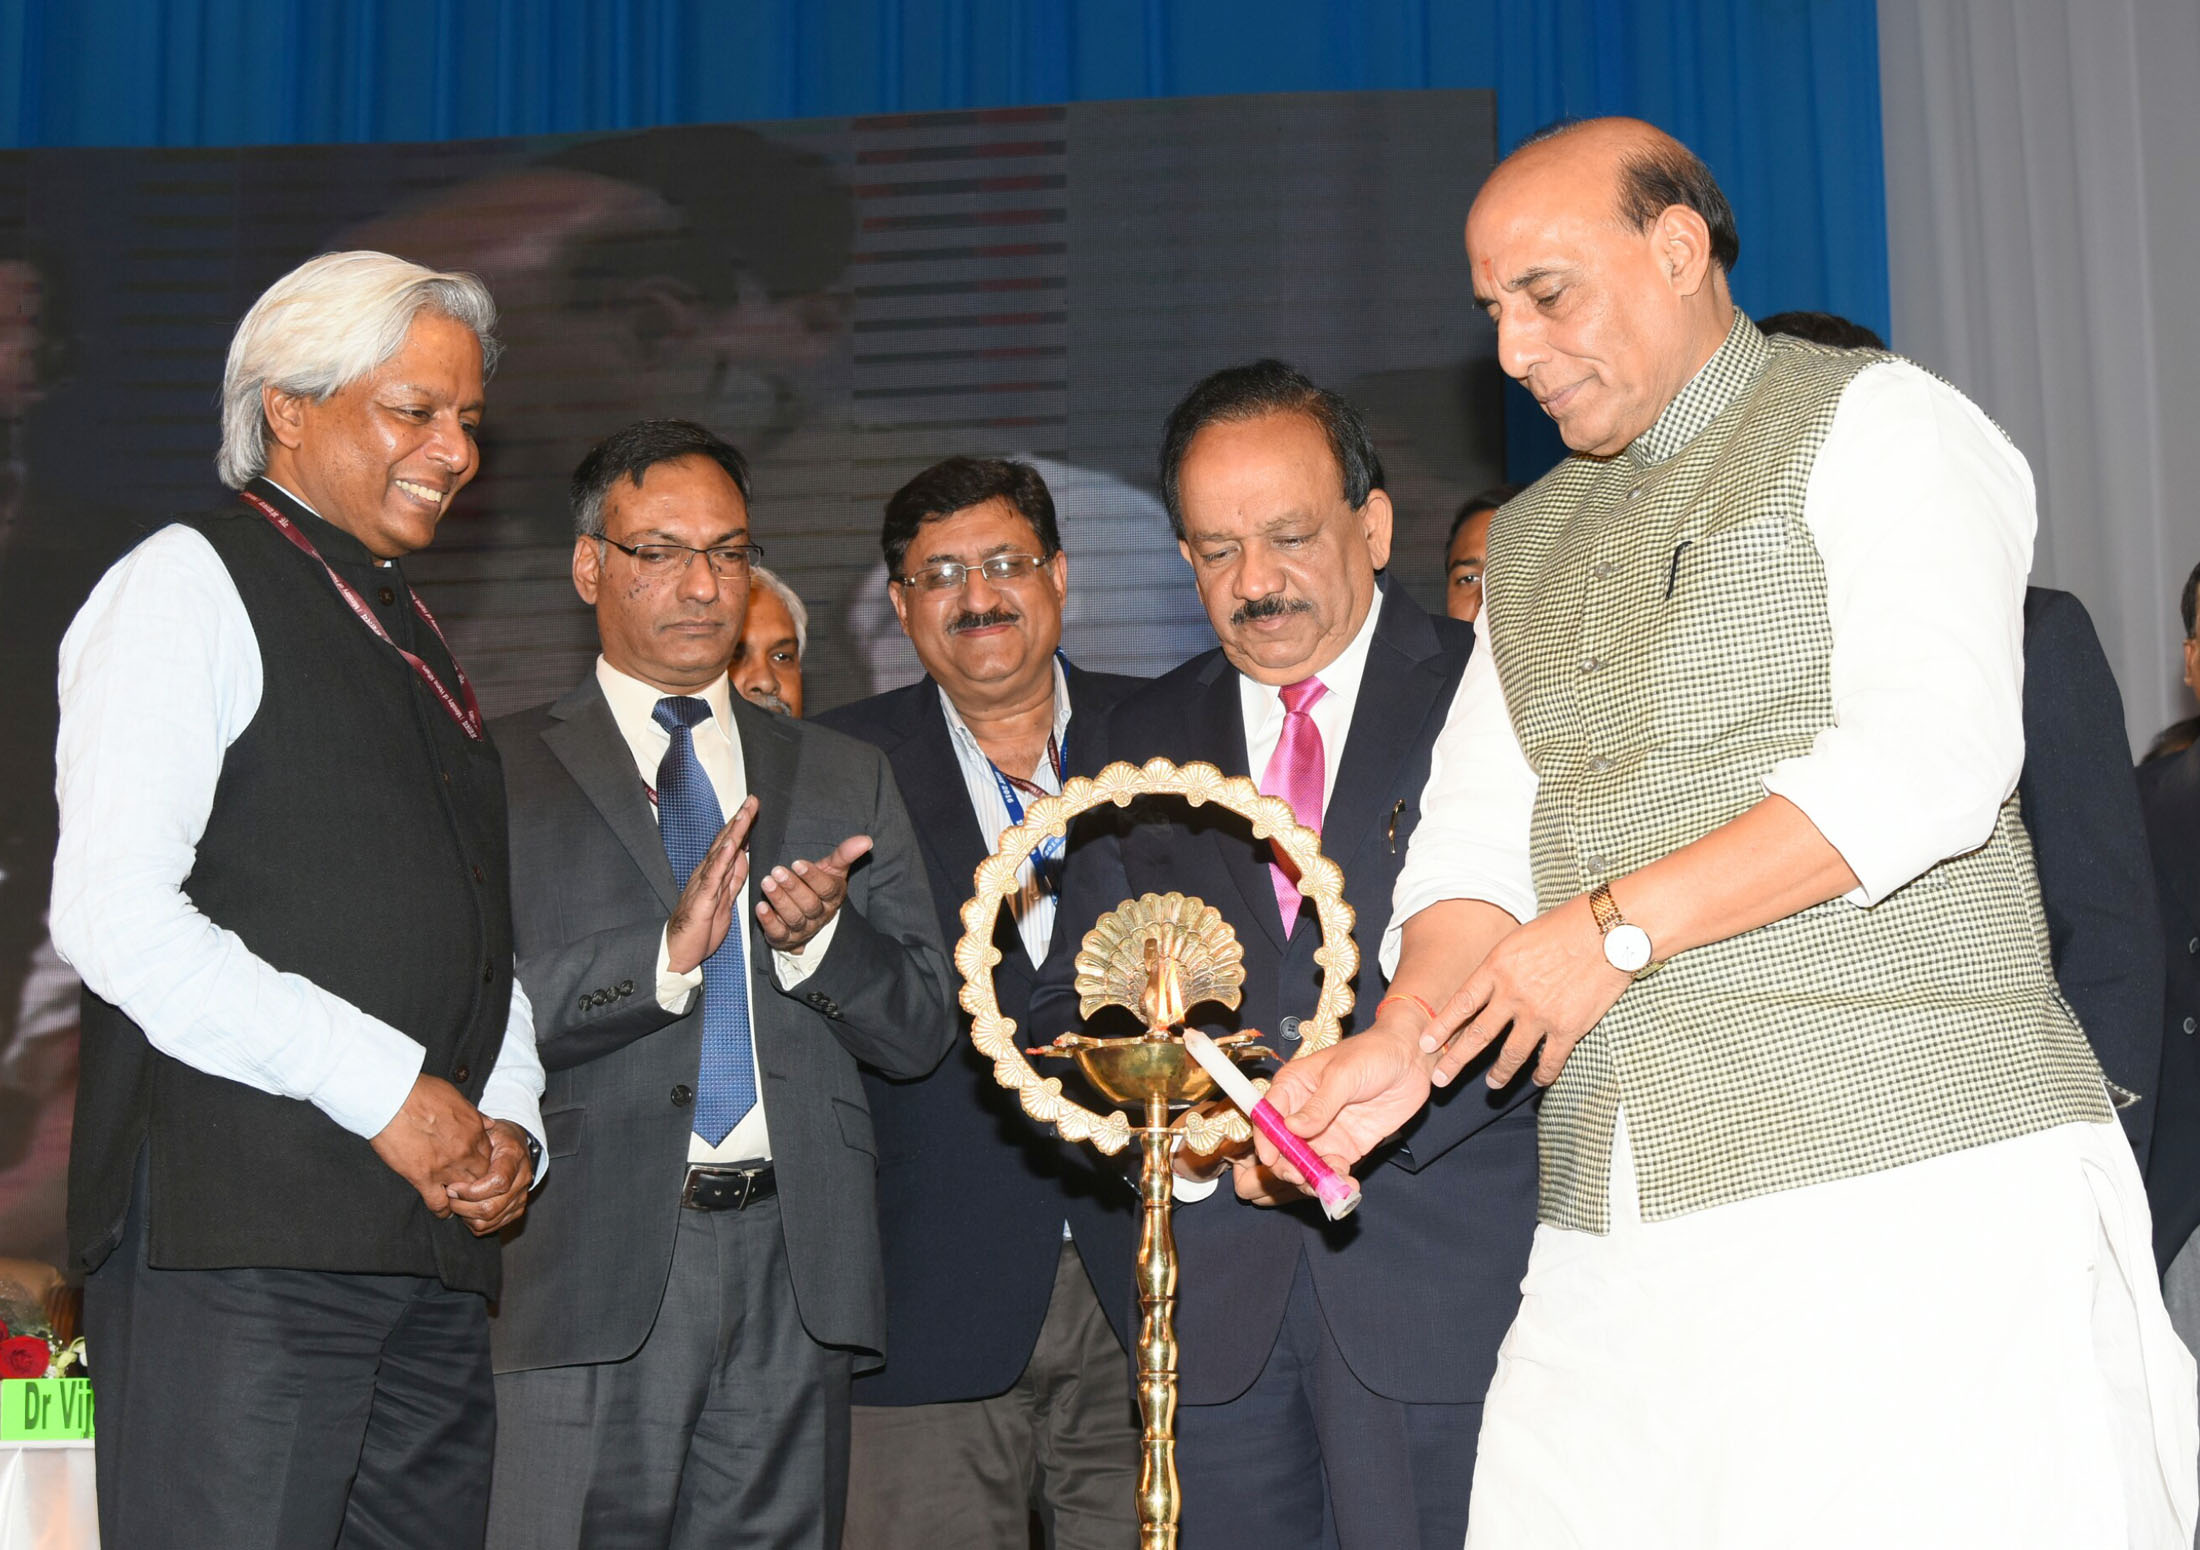 The Union Home Minister, Shri Rajnath Singh lighting the lamp to inaugurate the India International Science Festival 2016 (IISF-2016), organised by CSIR-NPL, in New Delhi on December 08, 2016. The Union Minister for Science & Technology and Earth Sciences, Dr. Harsh Vardhan, the Secretary, Department of Biotechnology, Dr. K. Vijayraghavan and the Secretary, Department of Science and Technology, Prof. Ashutosh Sharma are also seen.